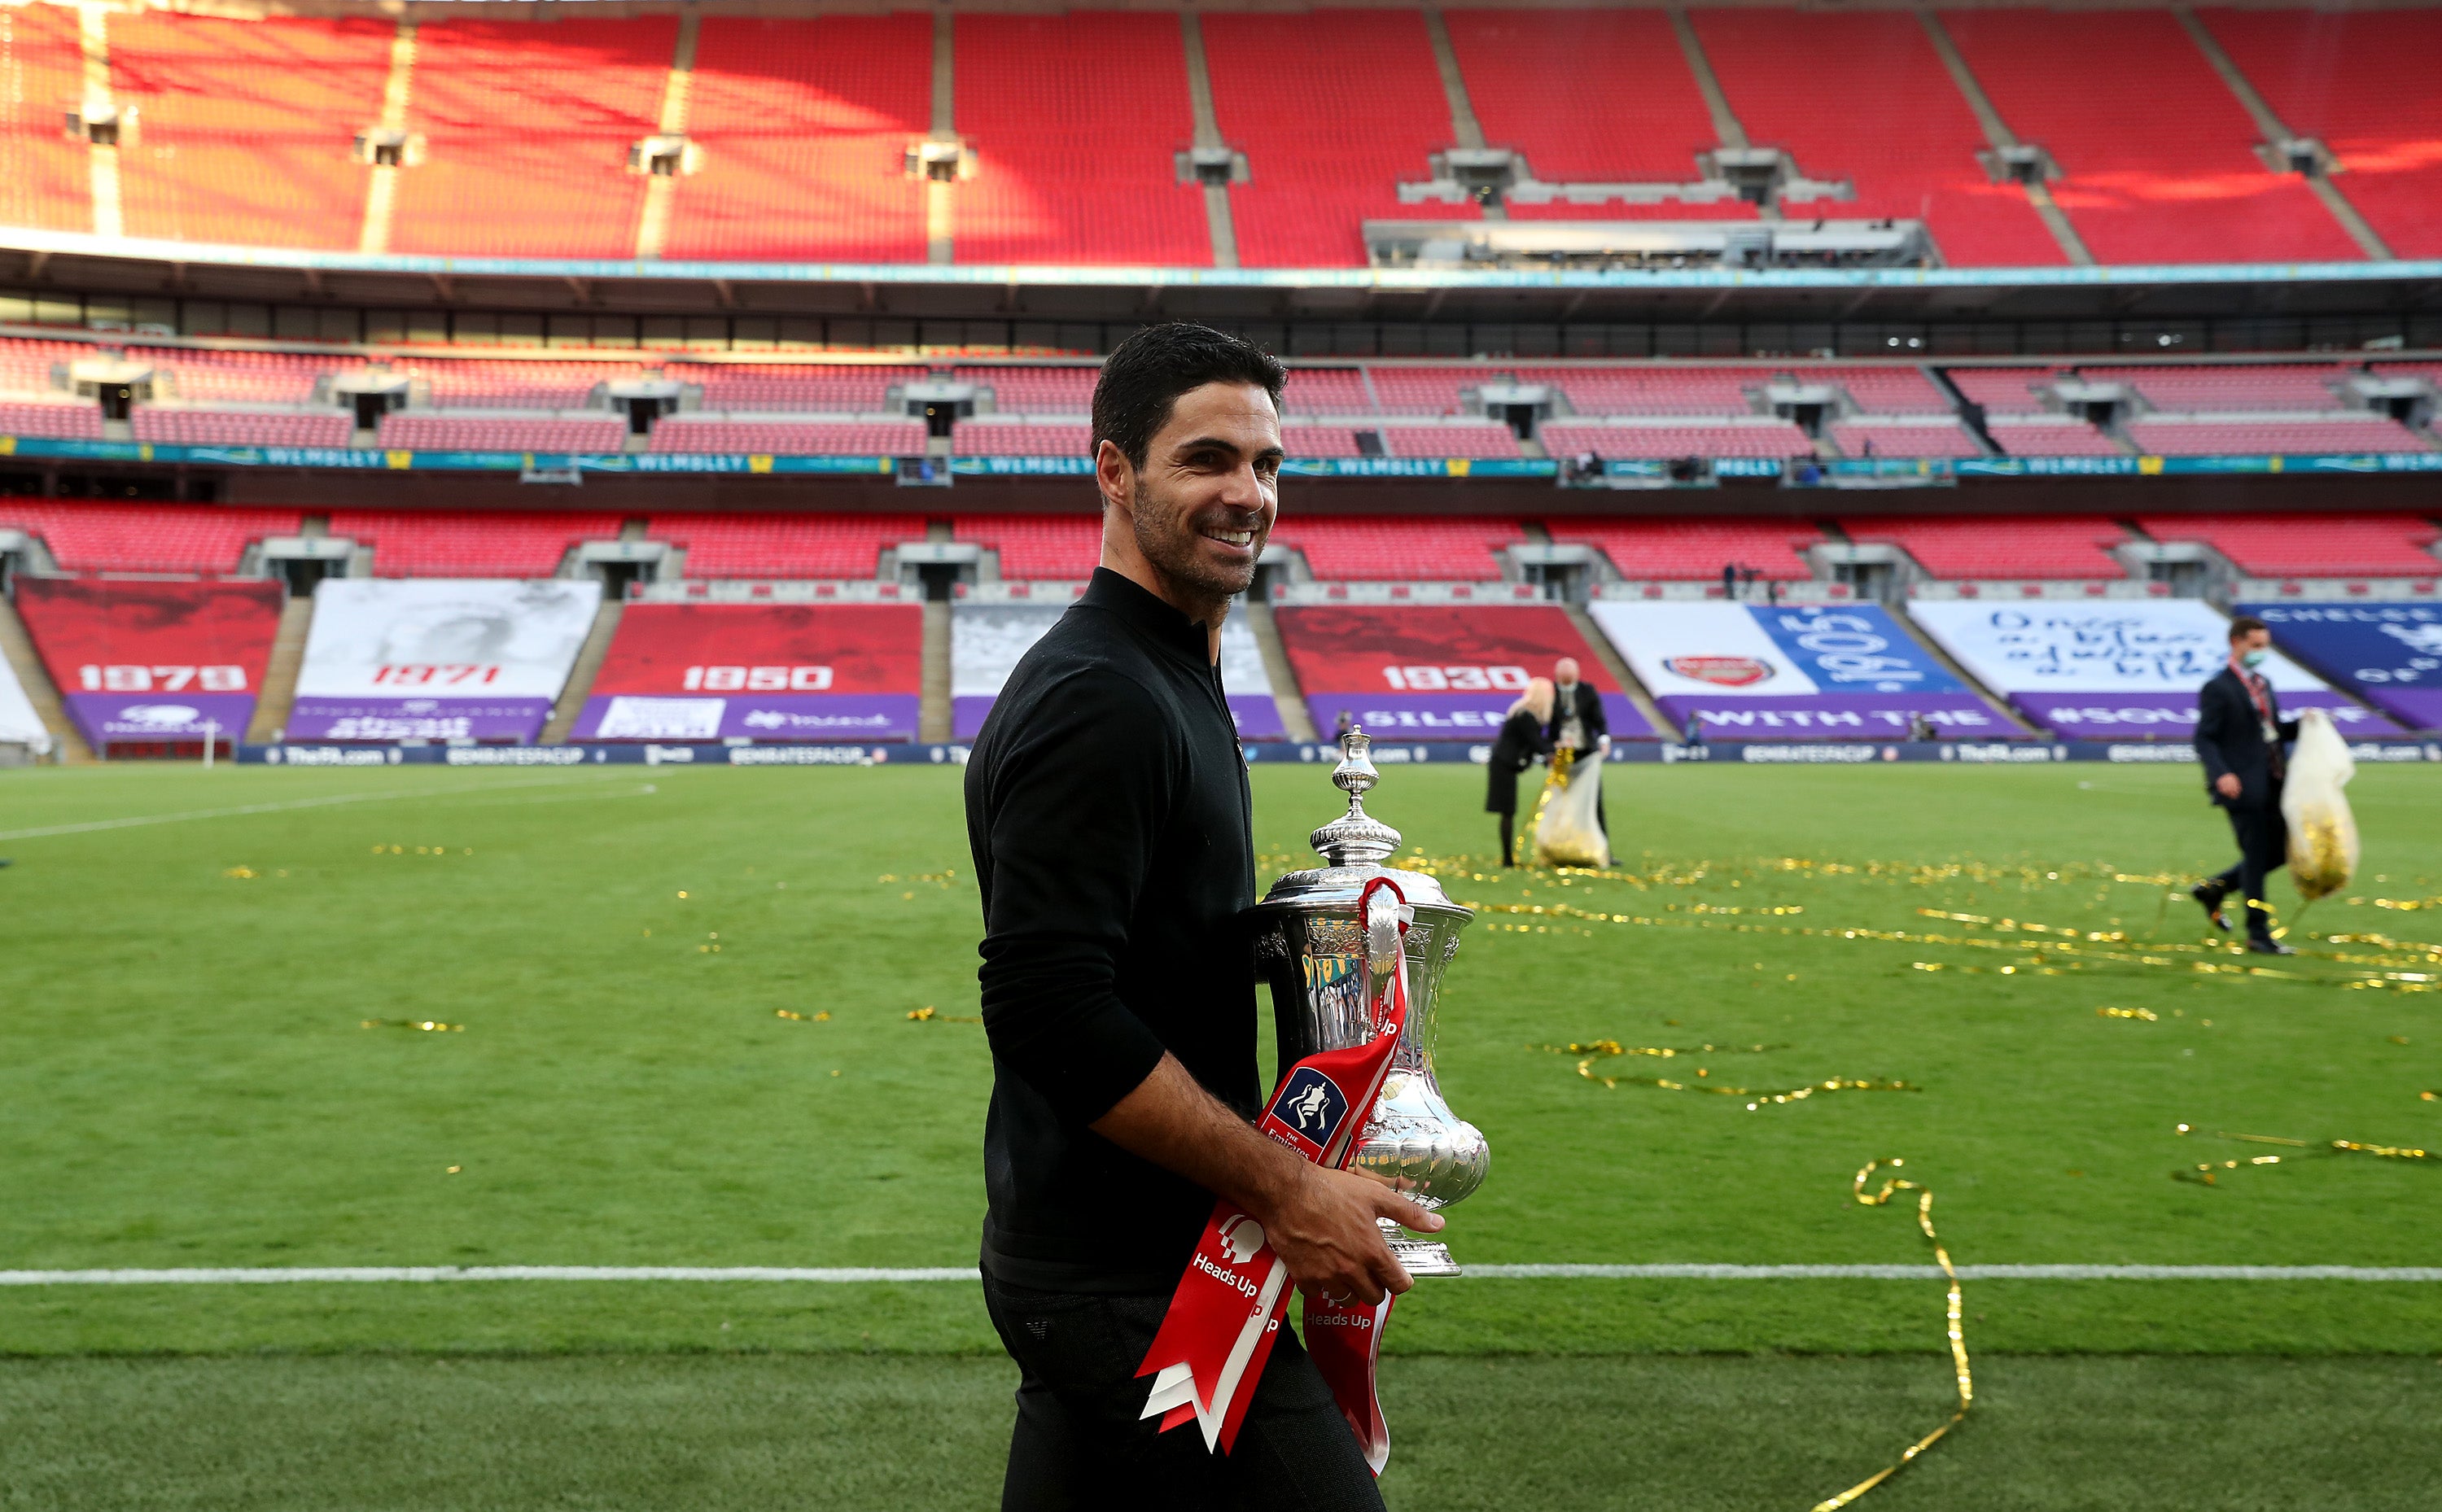 Mikel Arteta is searching for a second trophy as Arsenal manager